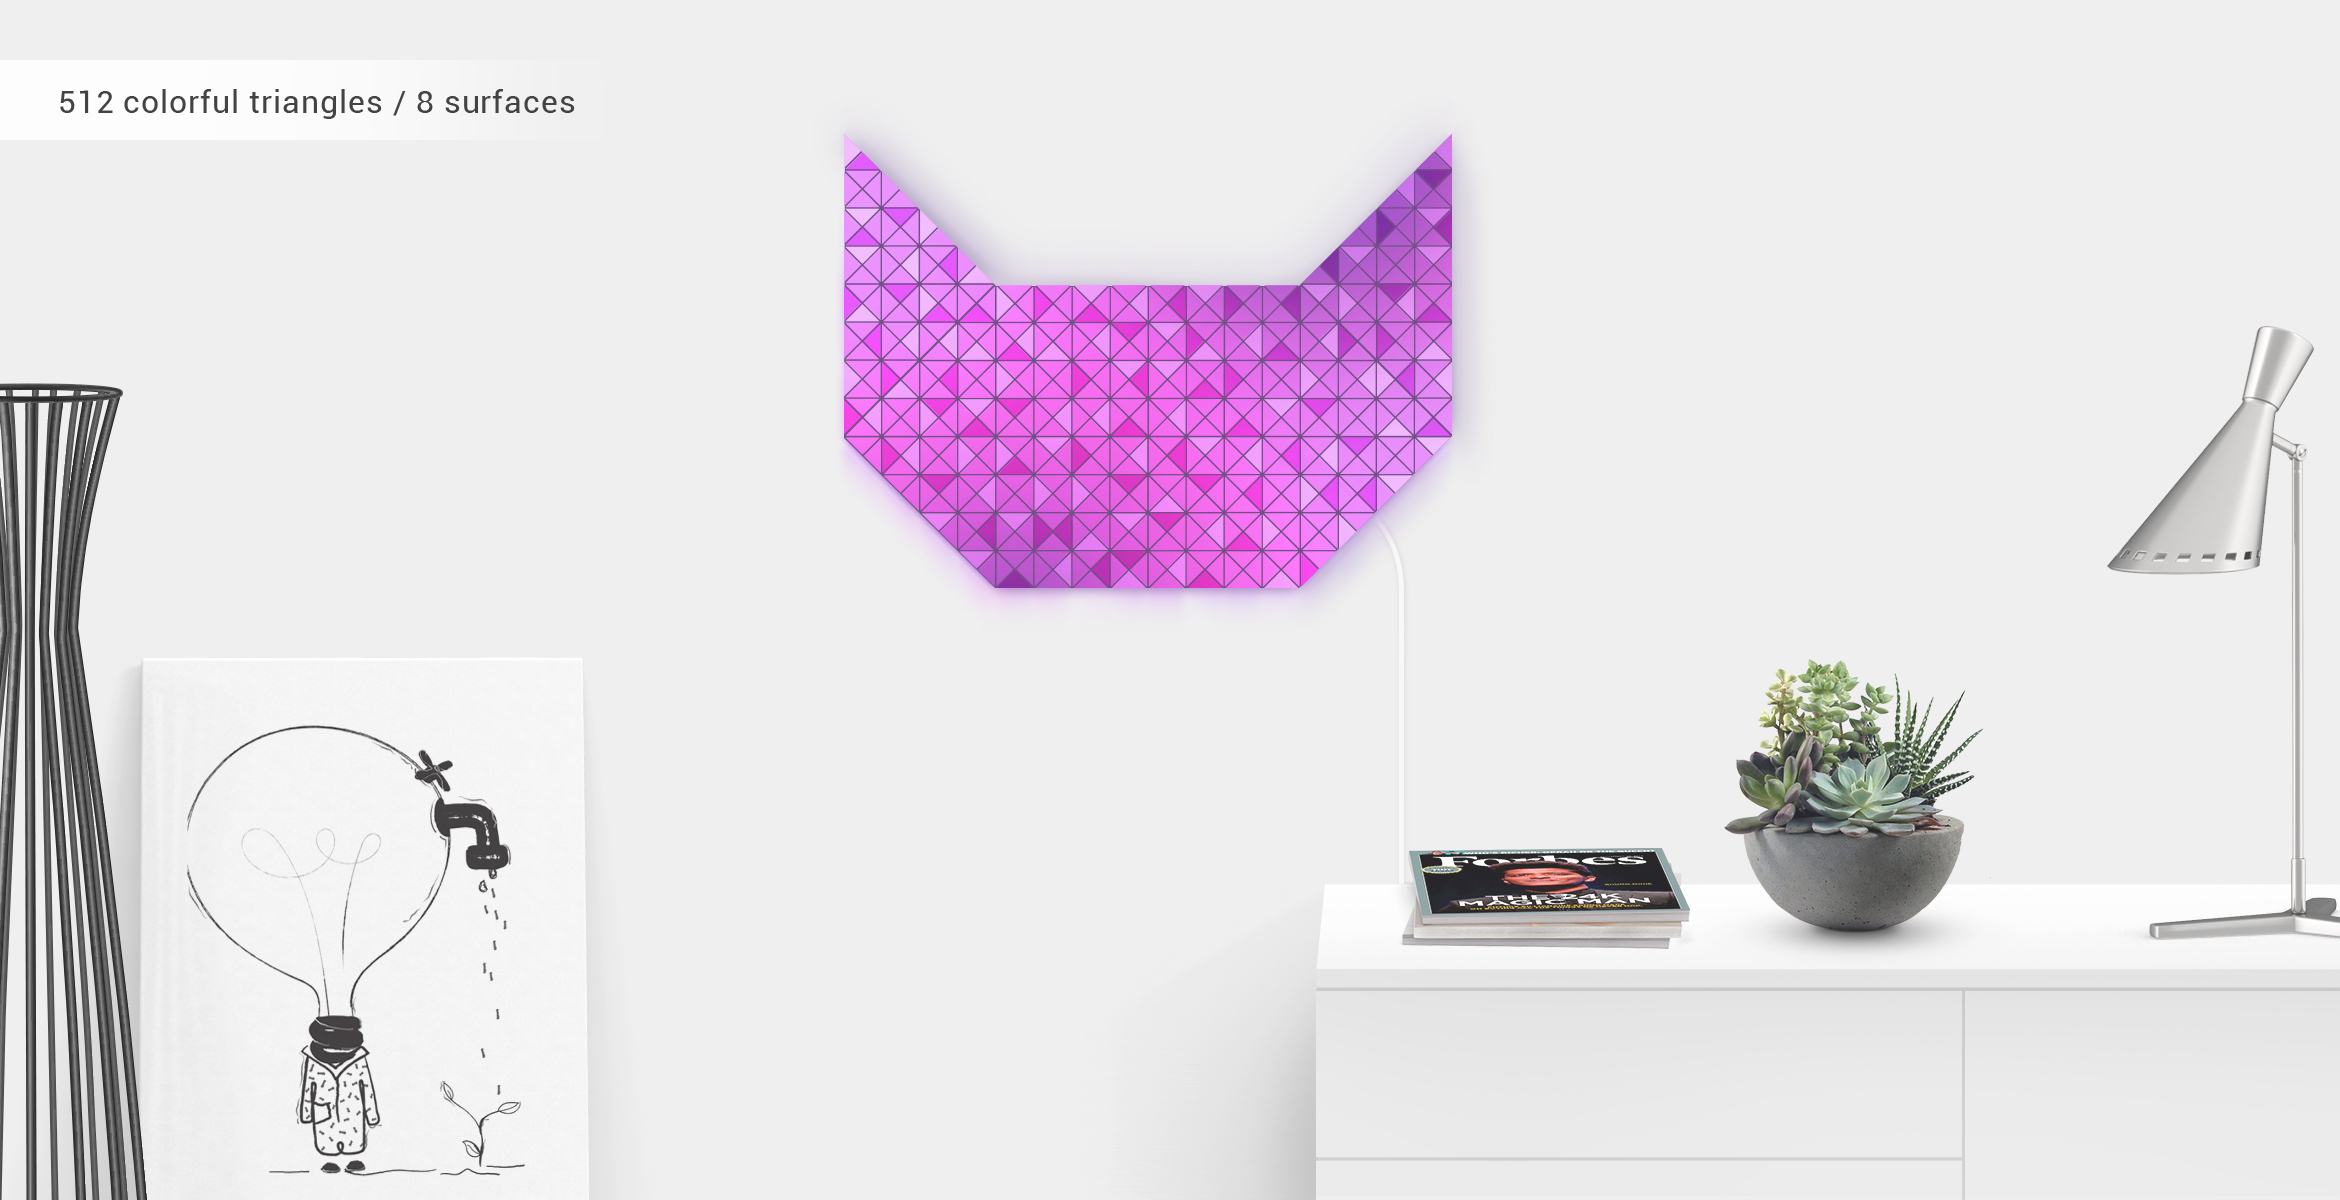 Cat shape in pink colour, assembled from 8 LaMetric SKY smart light surfaces, complements the room interior